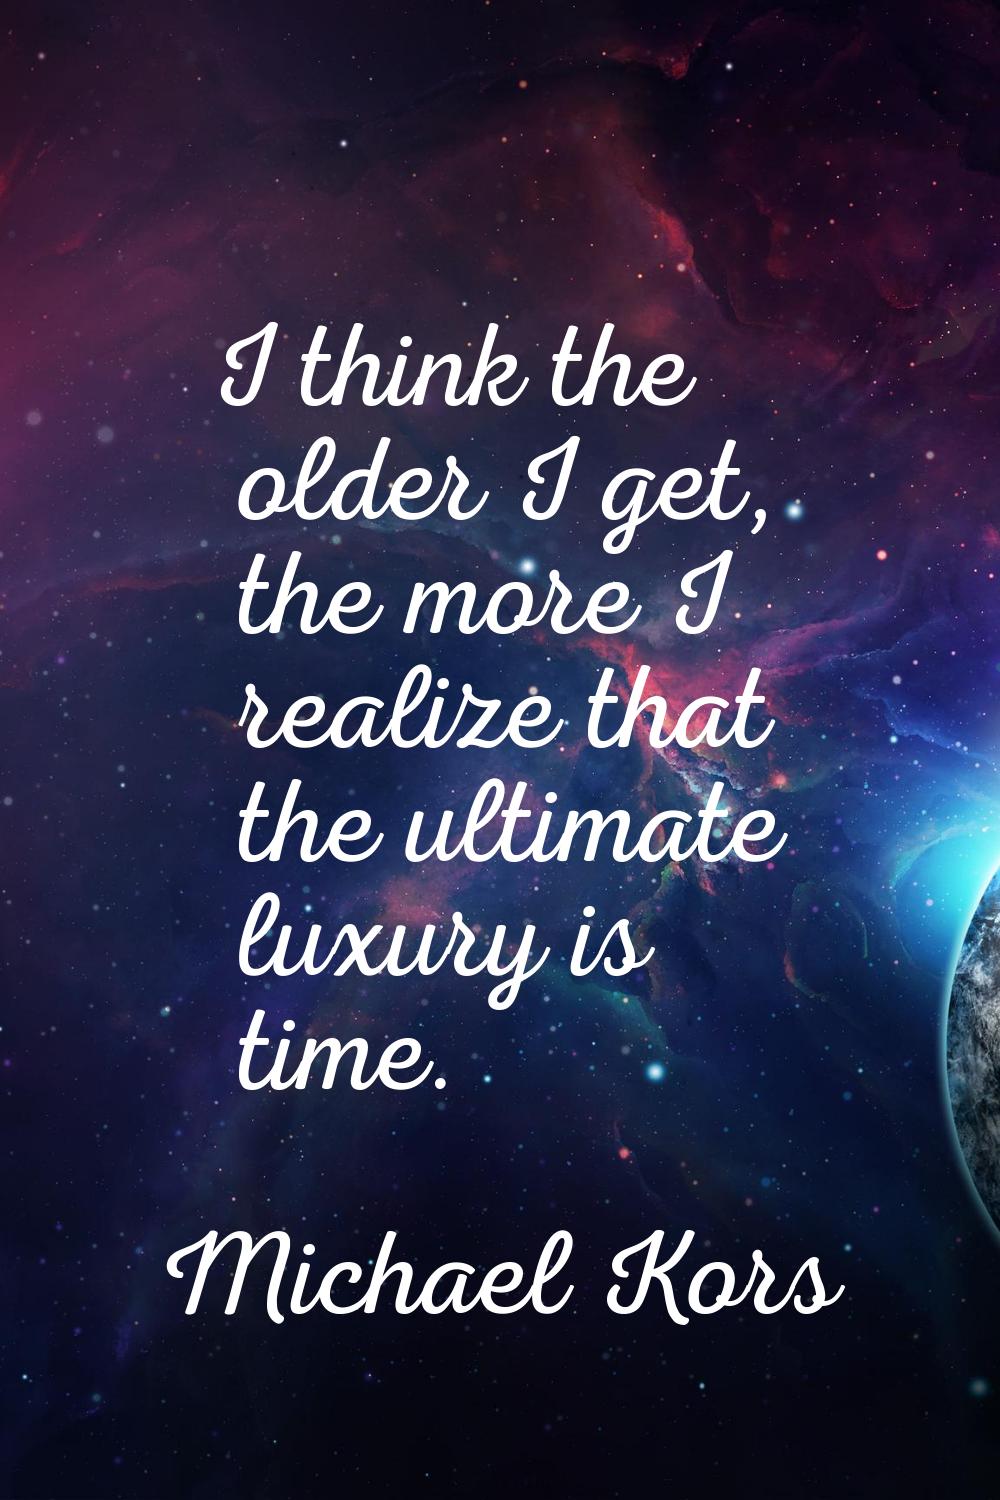 I think the older I get, the more I realize that the ultimate luxury is time.